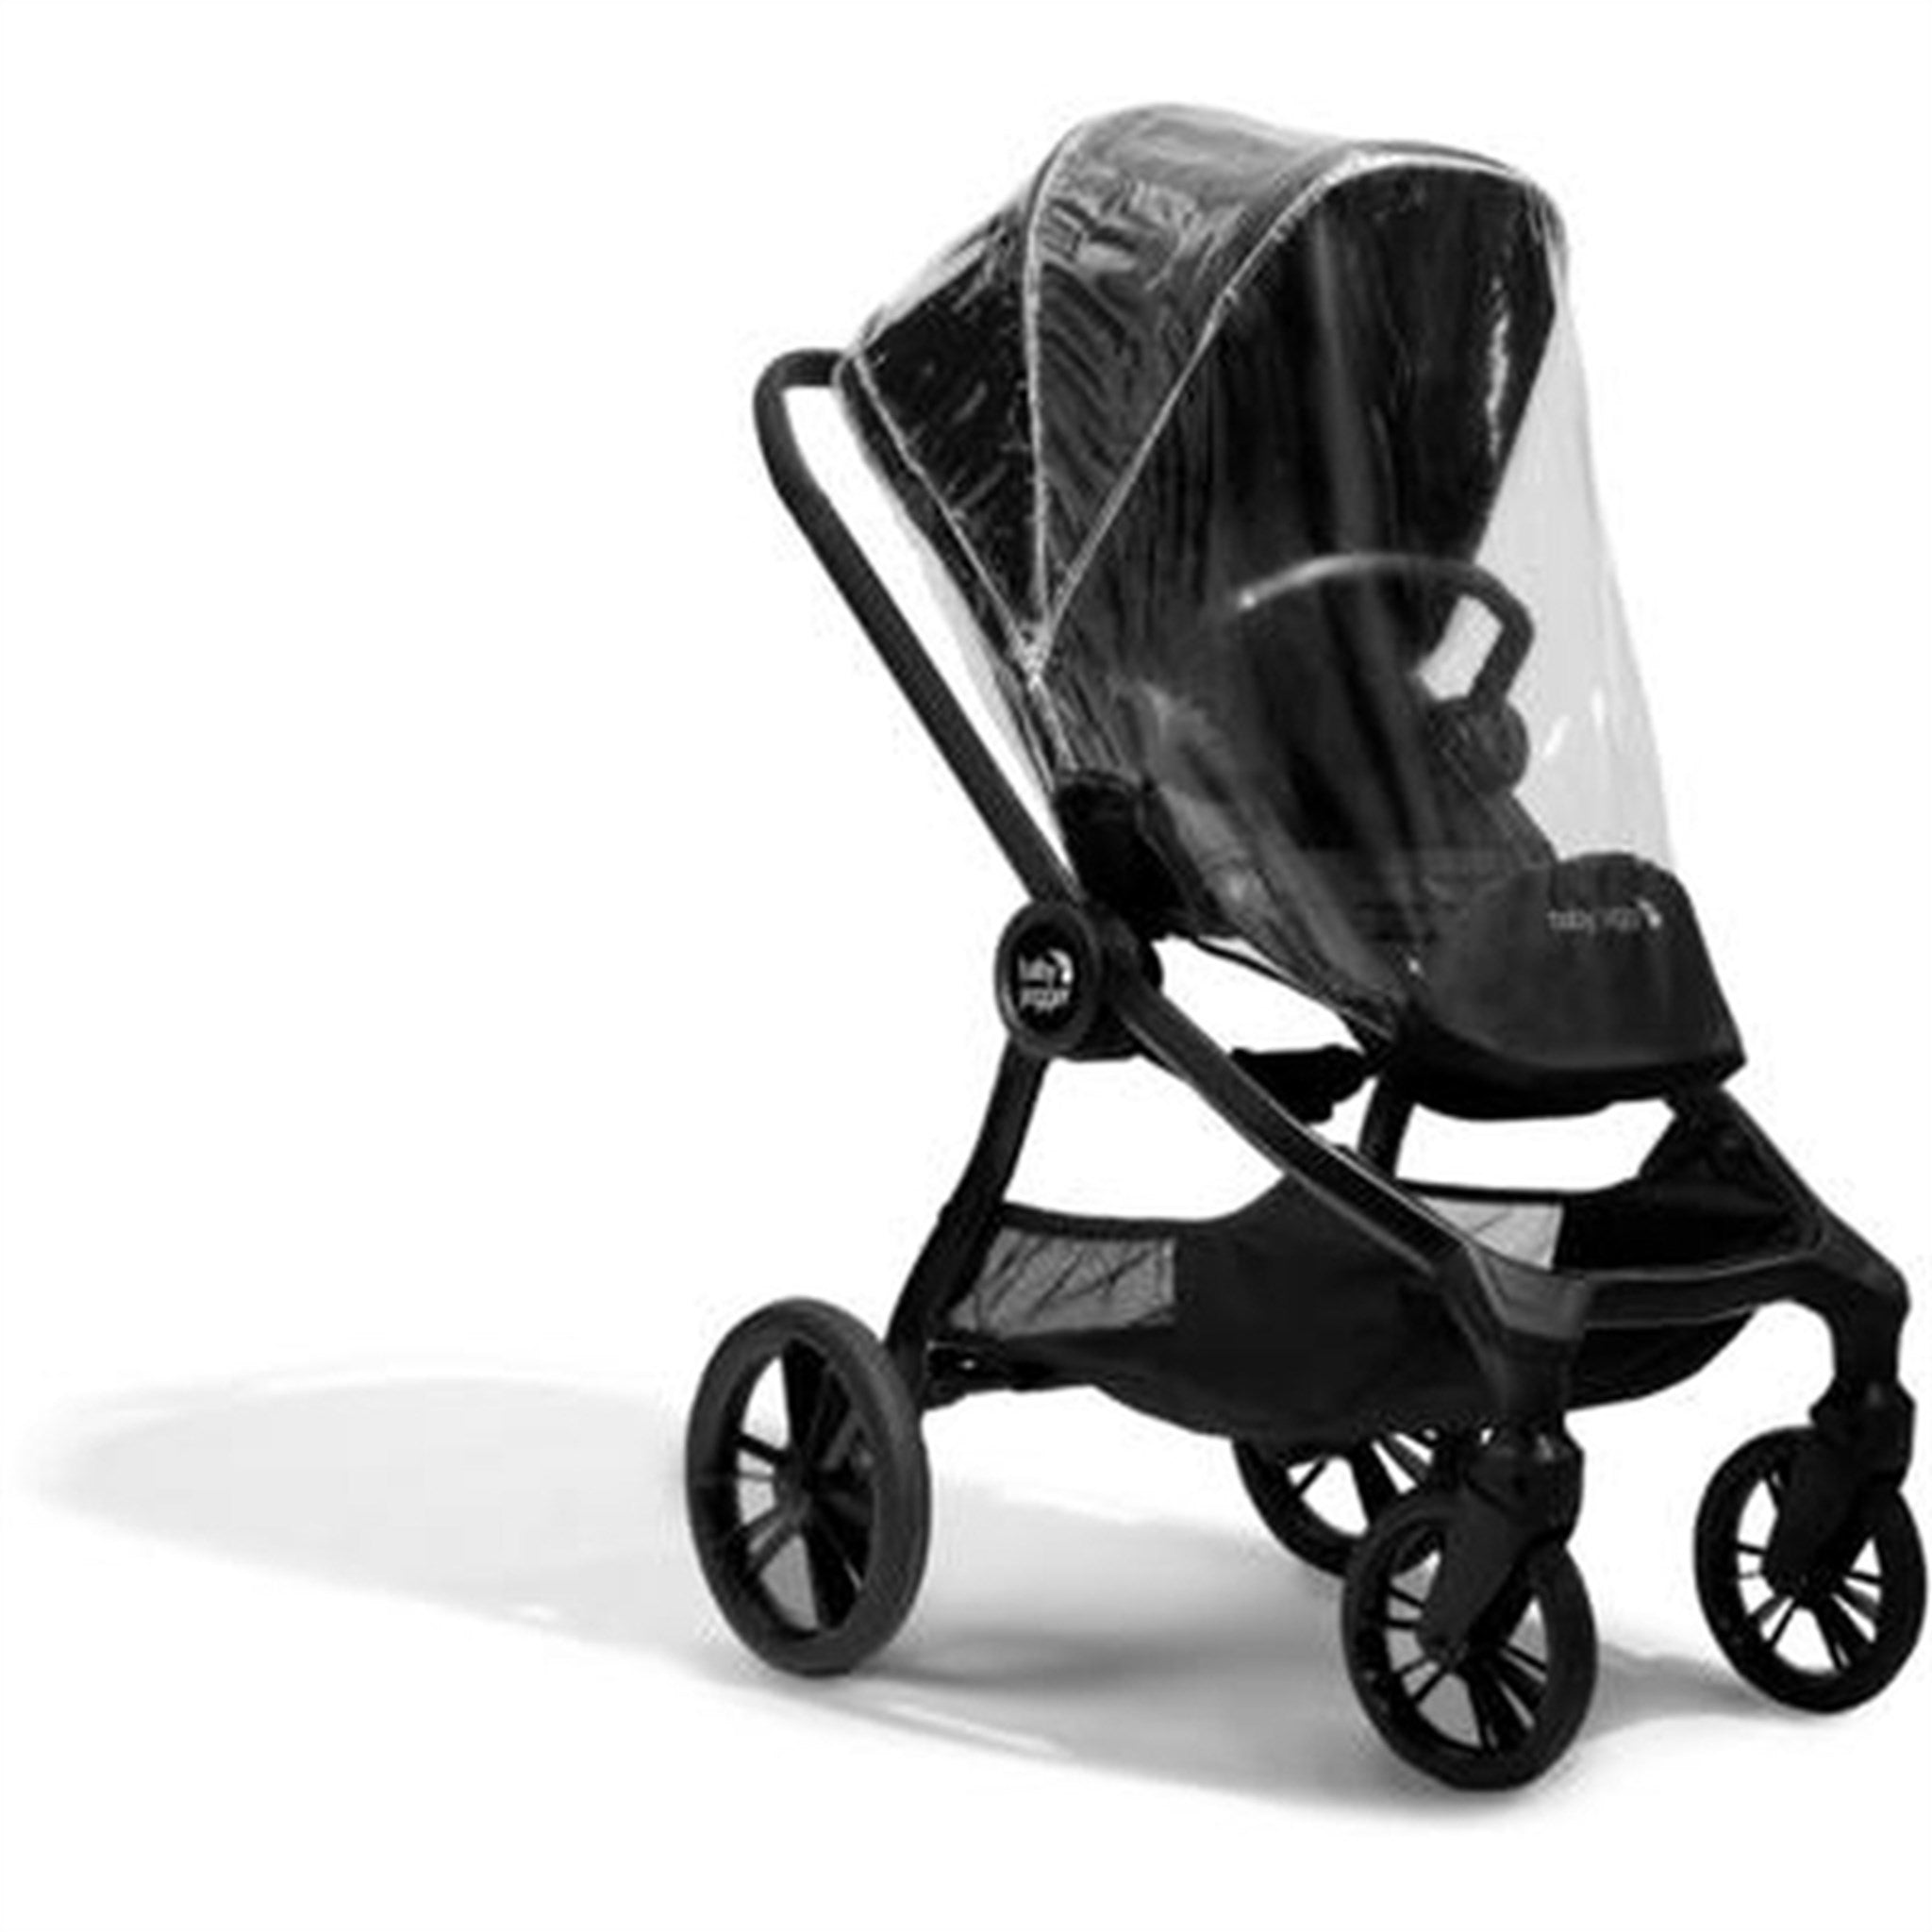 Baby Jogger Rain Cover For City Sights